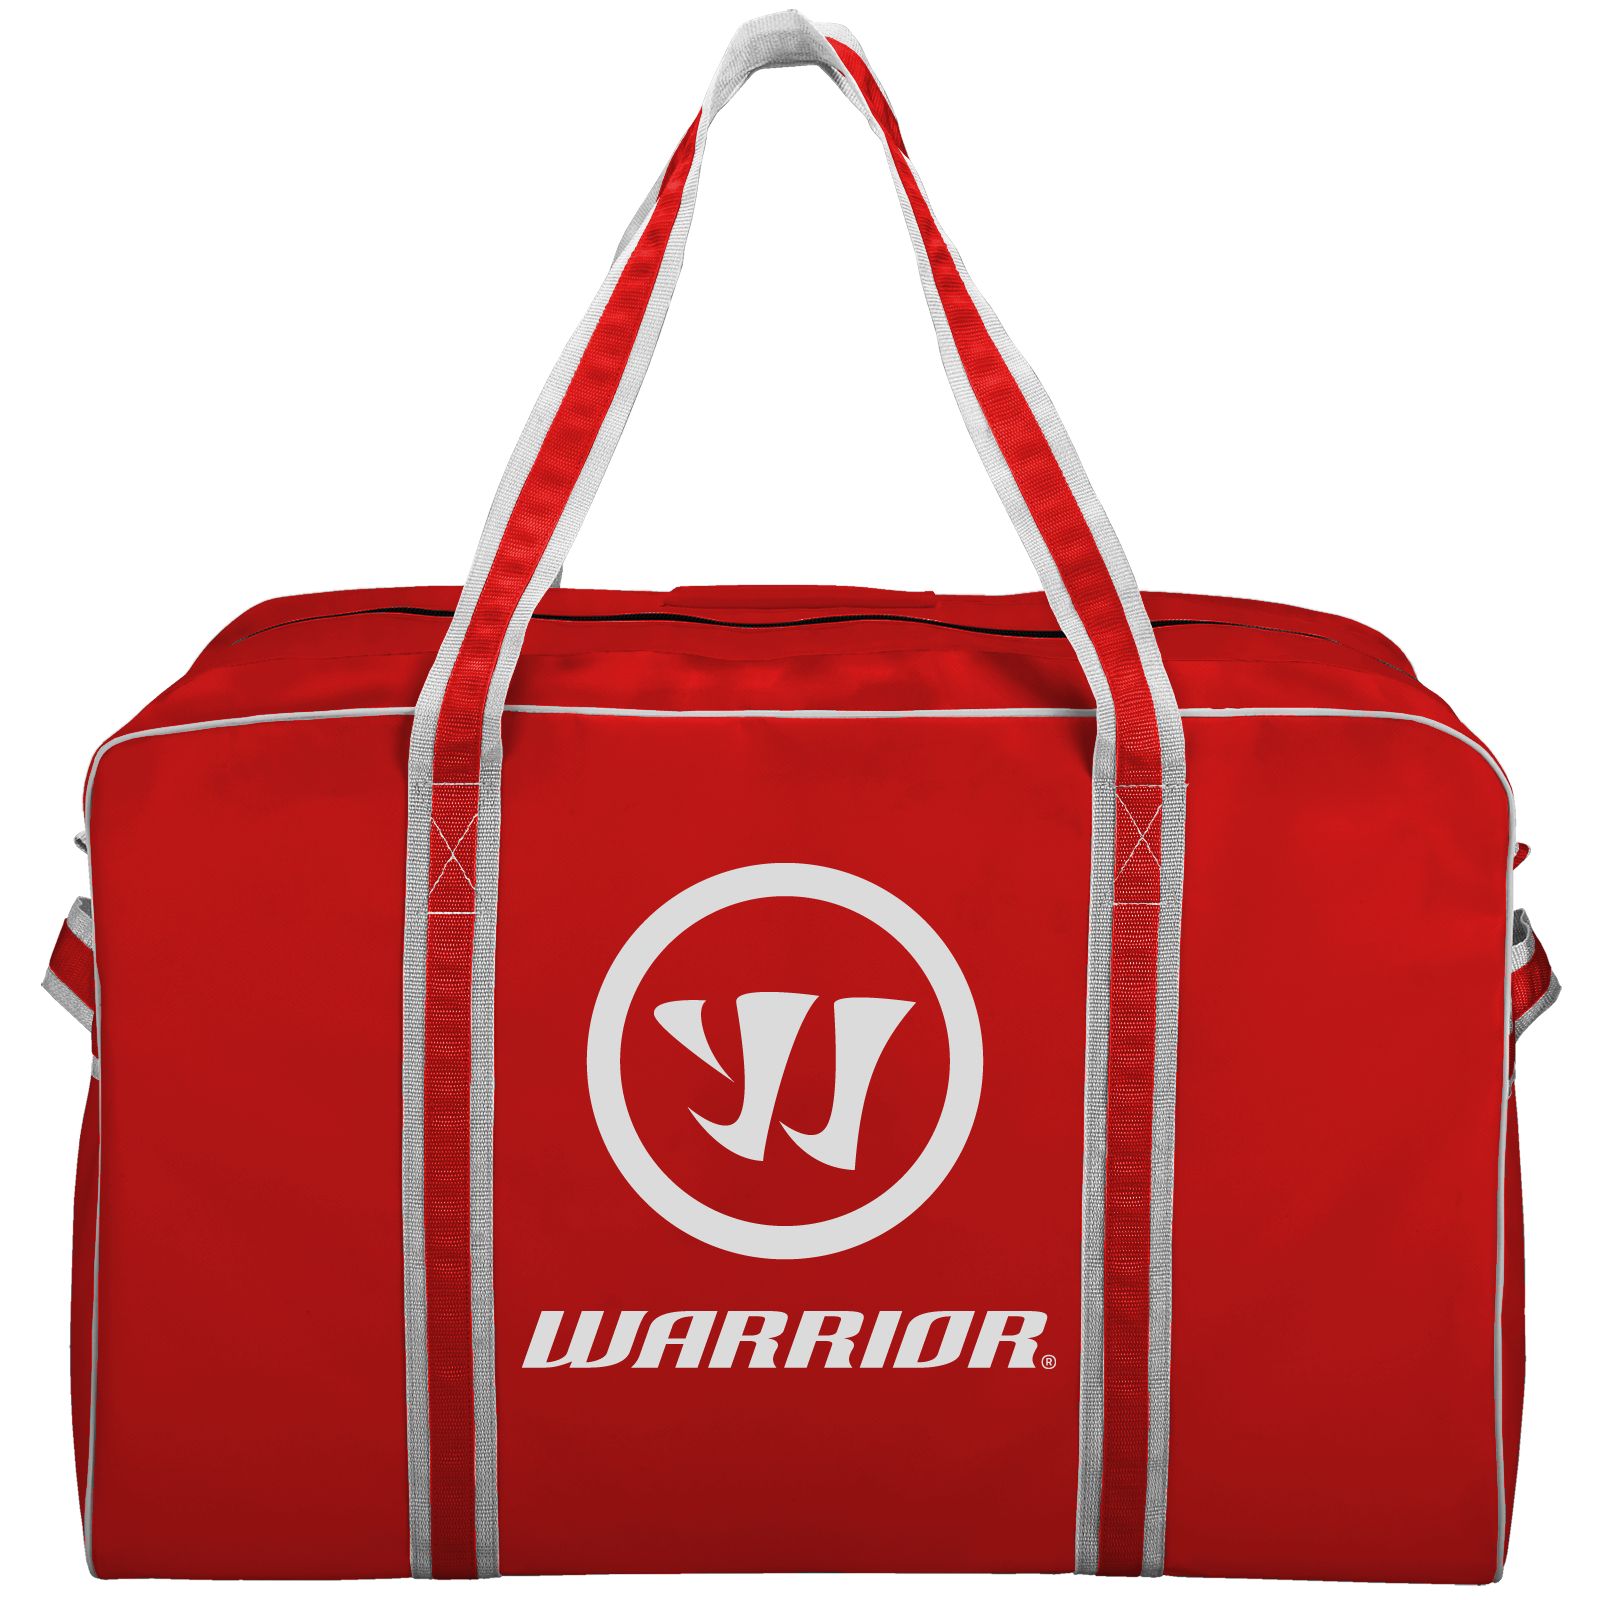 Warrior Pro Bag, Red with White image number 0